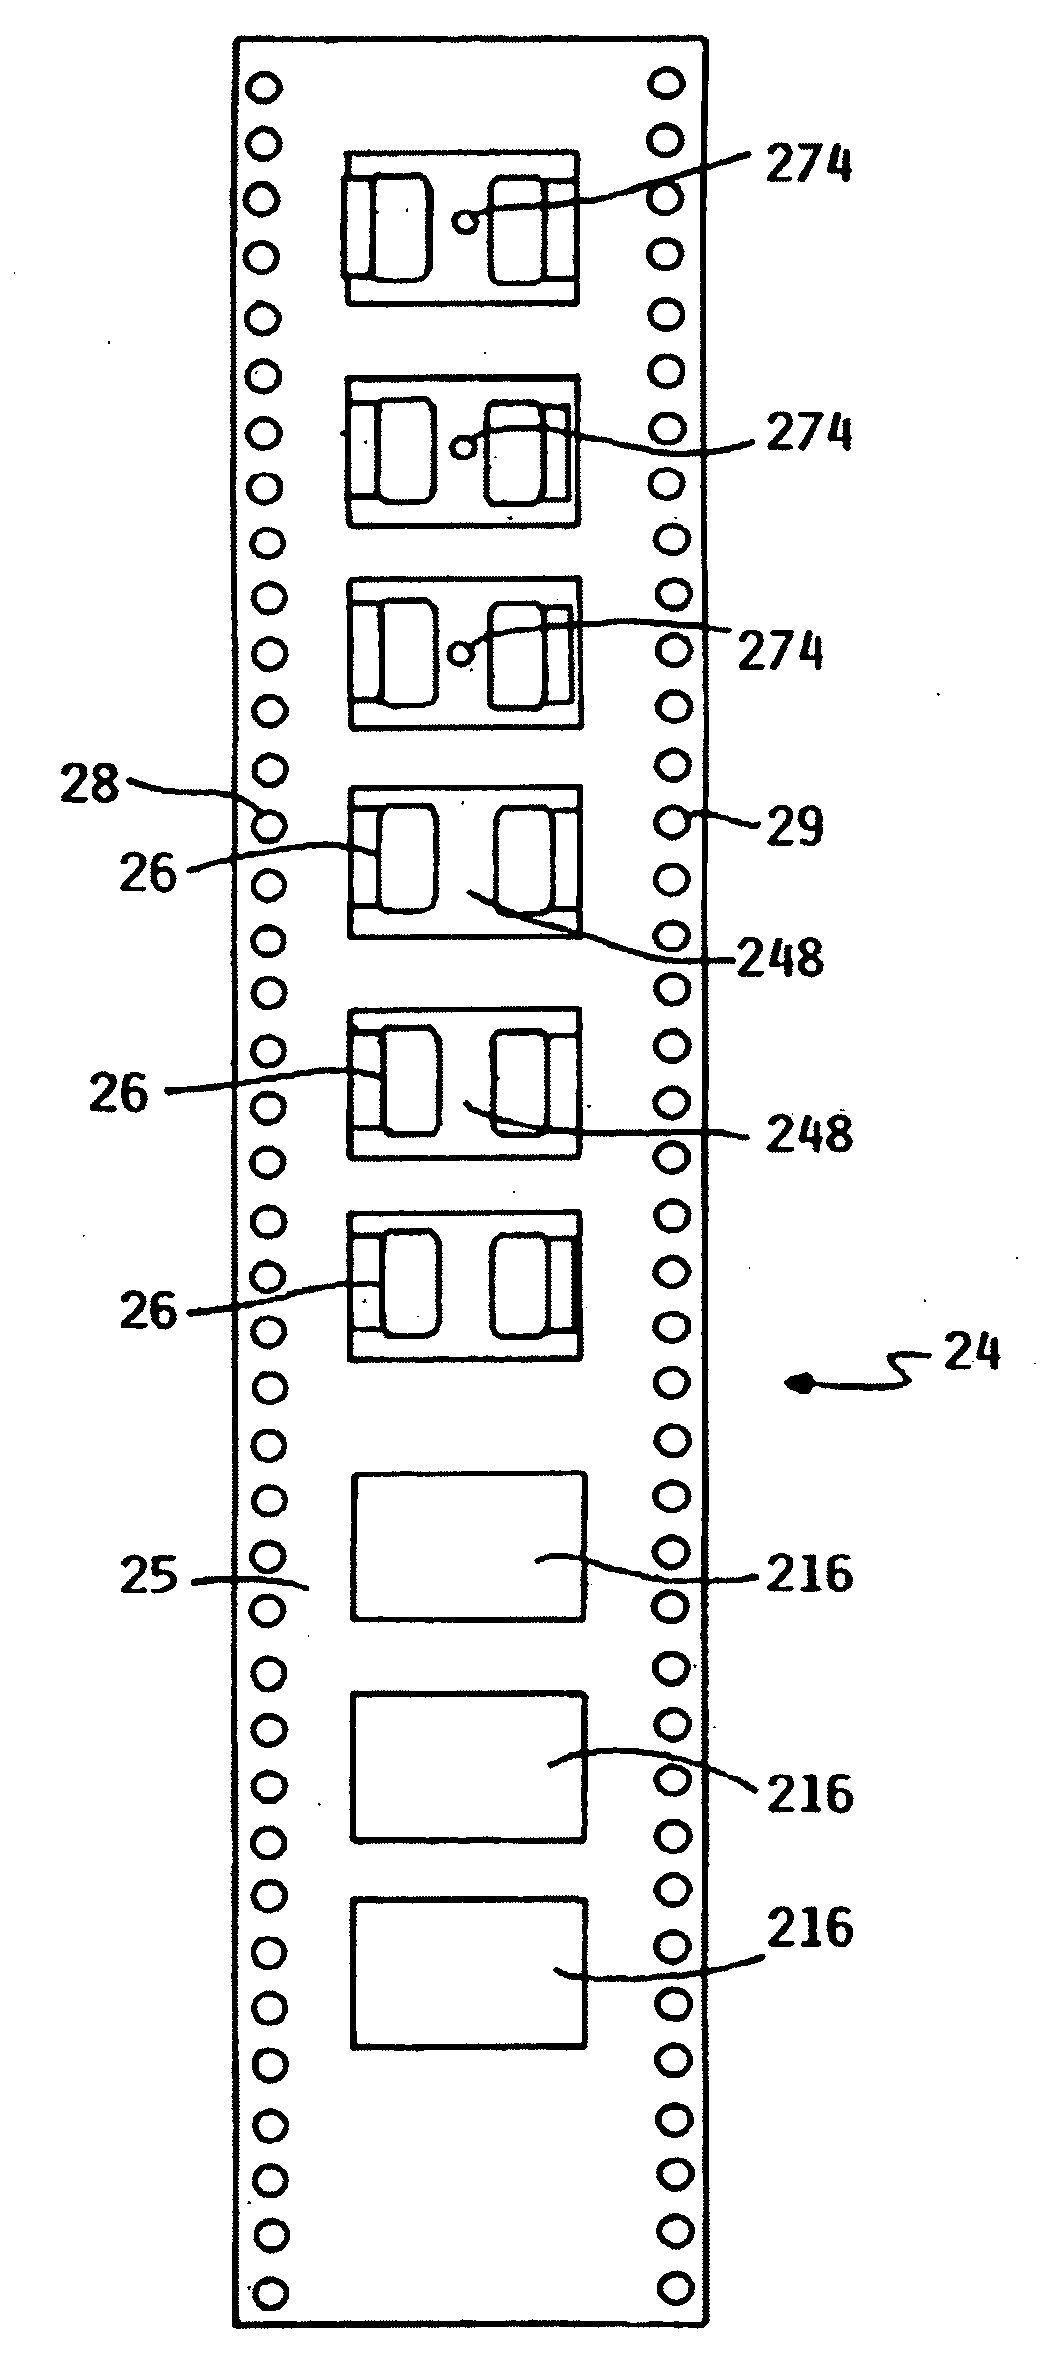 Plastic Embossed Carrier Tape Apparatus and Process